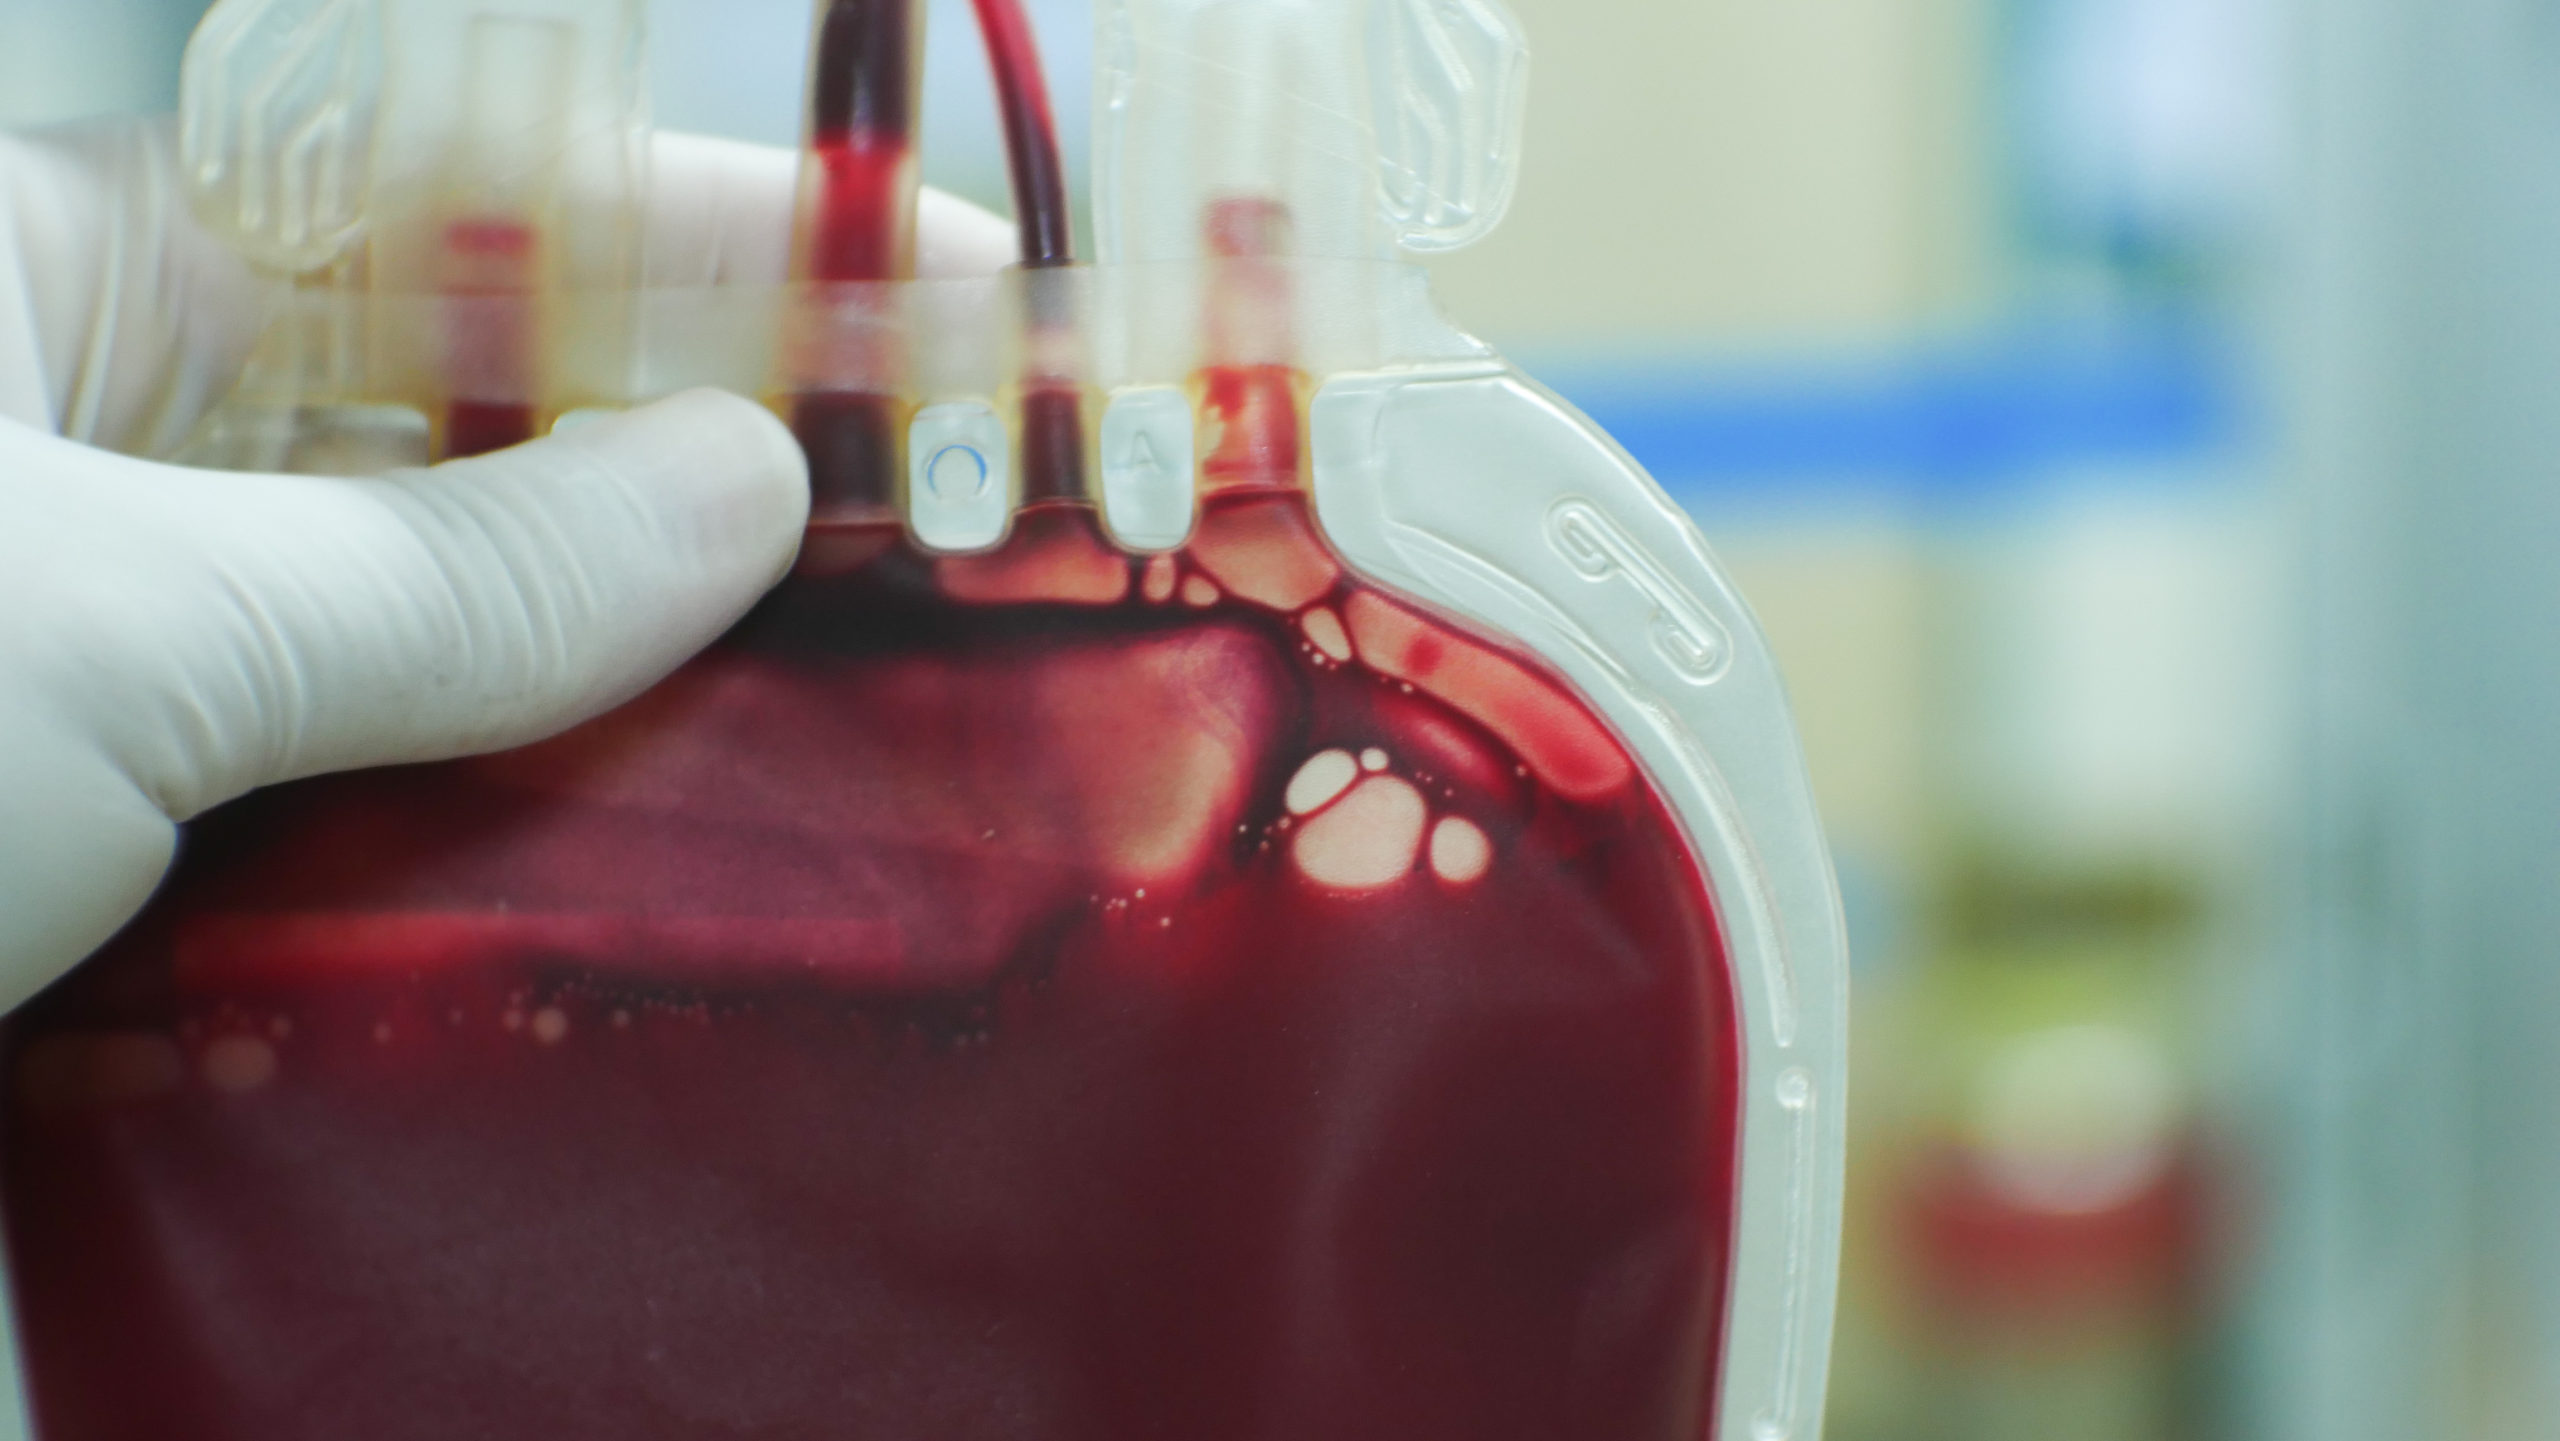 Blood centers across nation report critical shortages